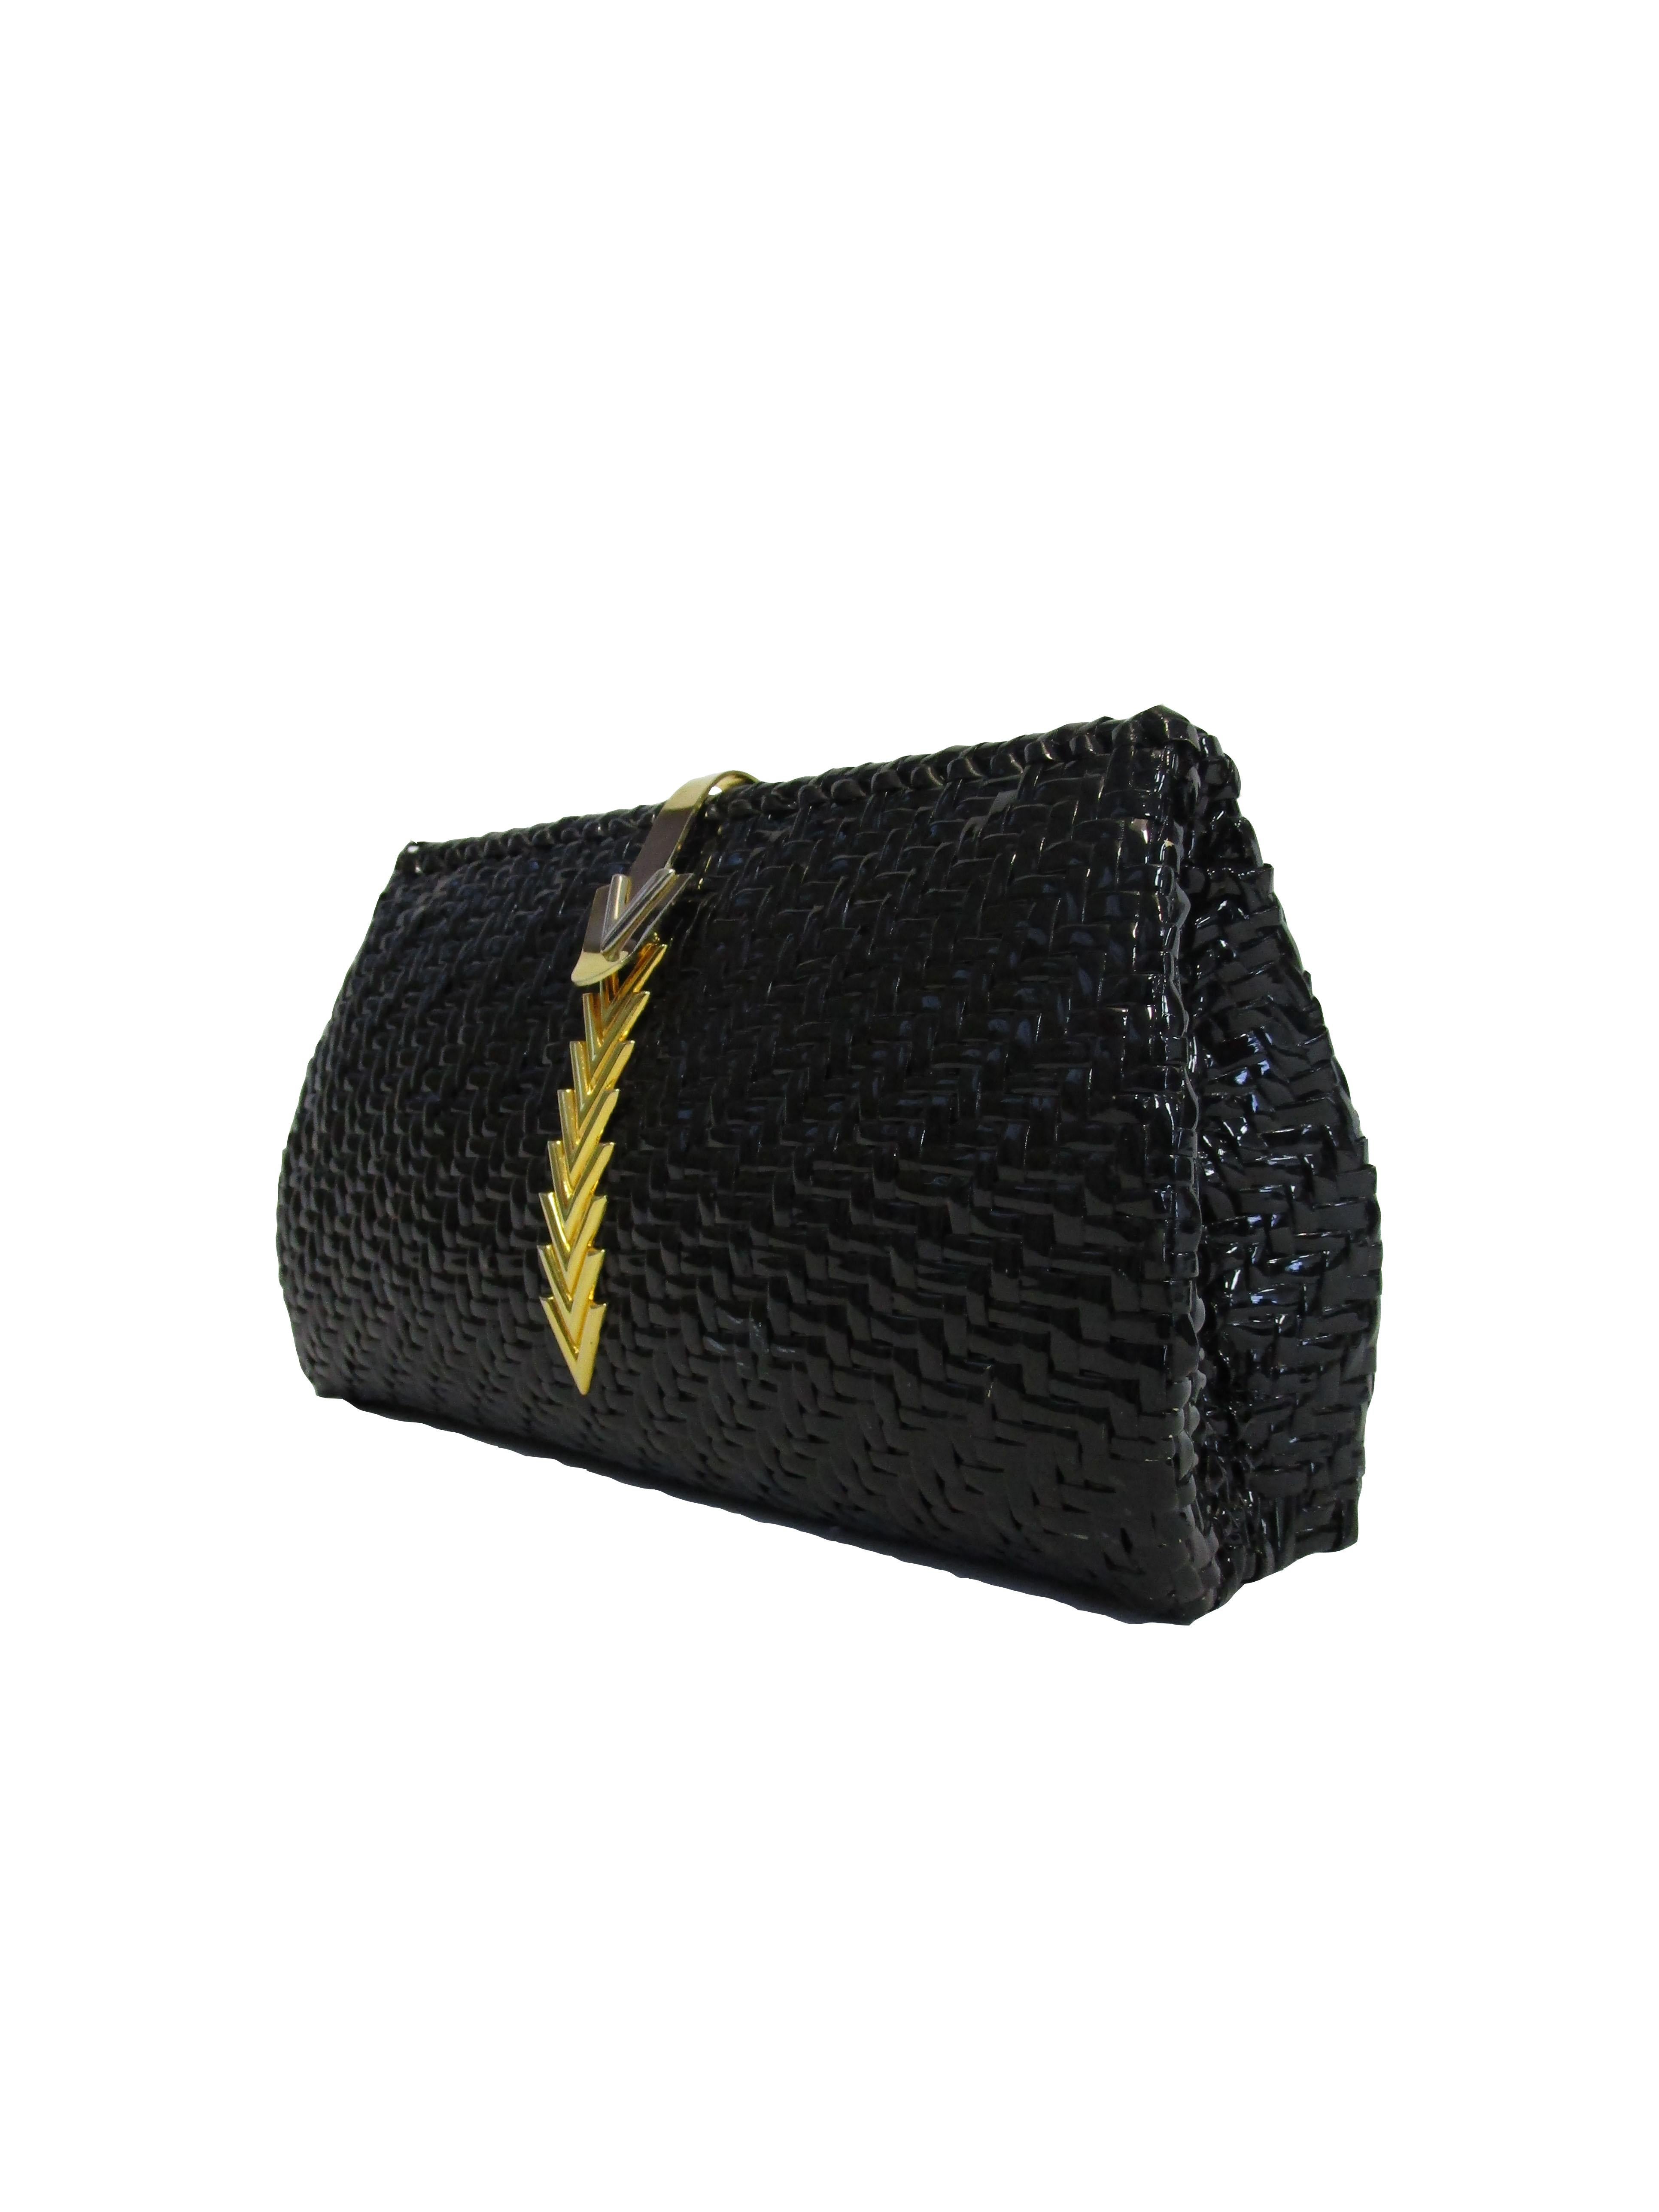 
Resort Season Perfection boasts this Sleek and Chic Black Wicker clutch by Mario Valentino! This bag features a glazed exterior with a classic gold accented 